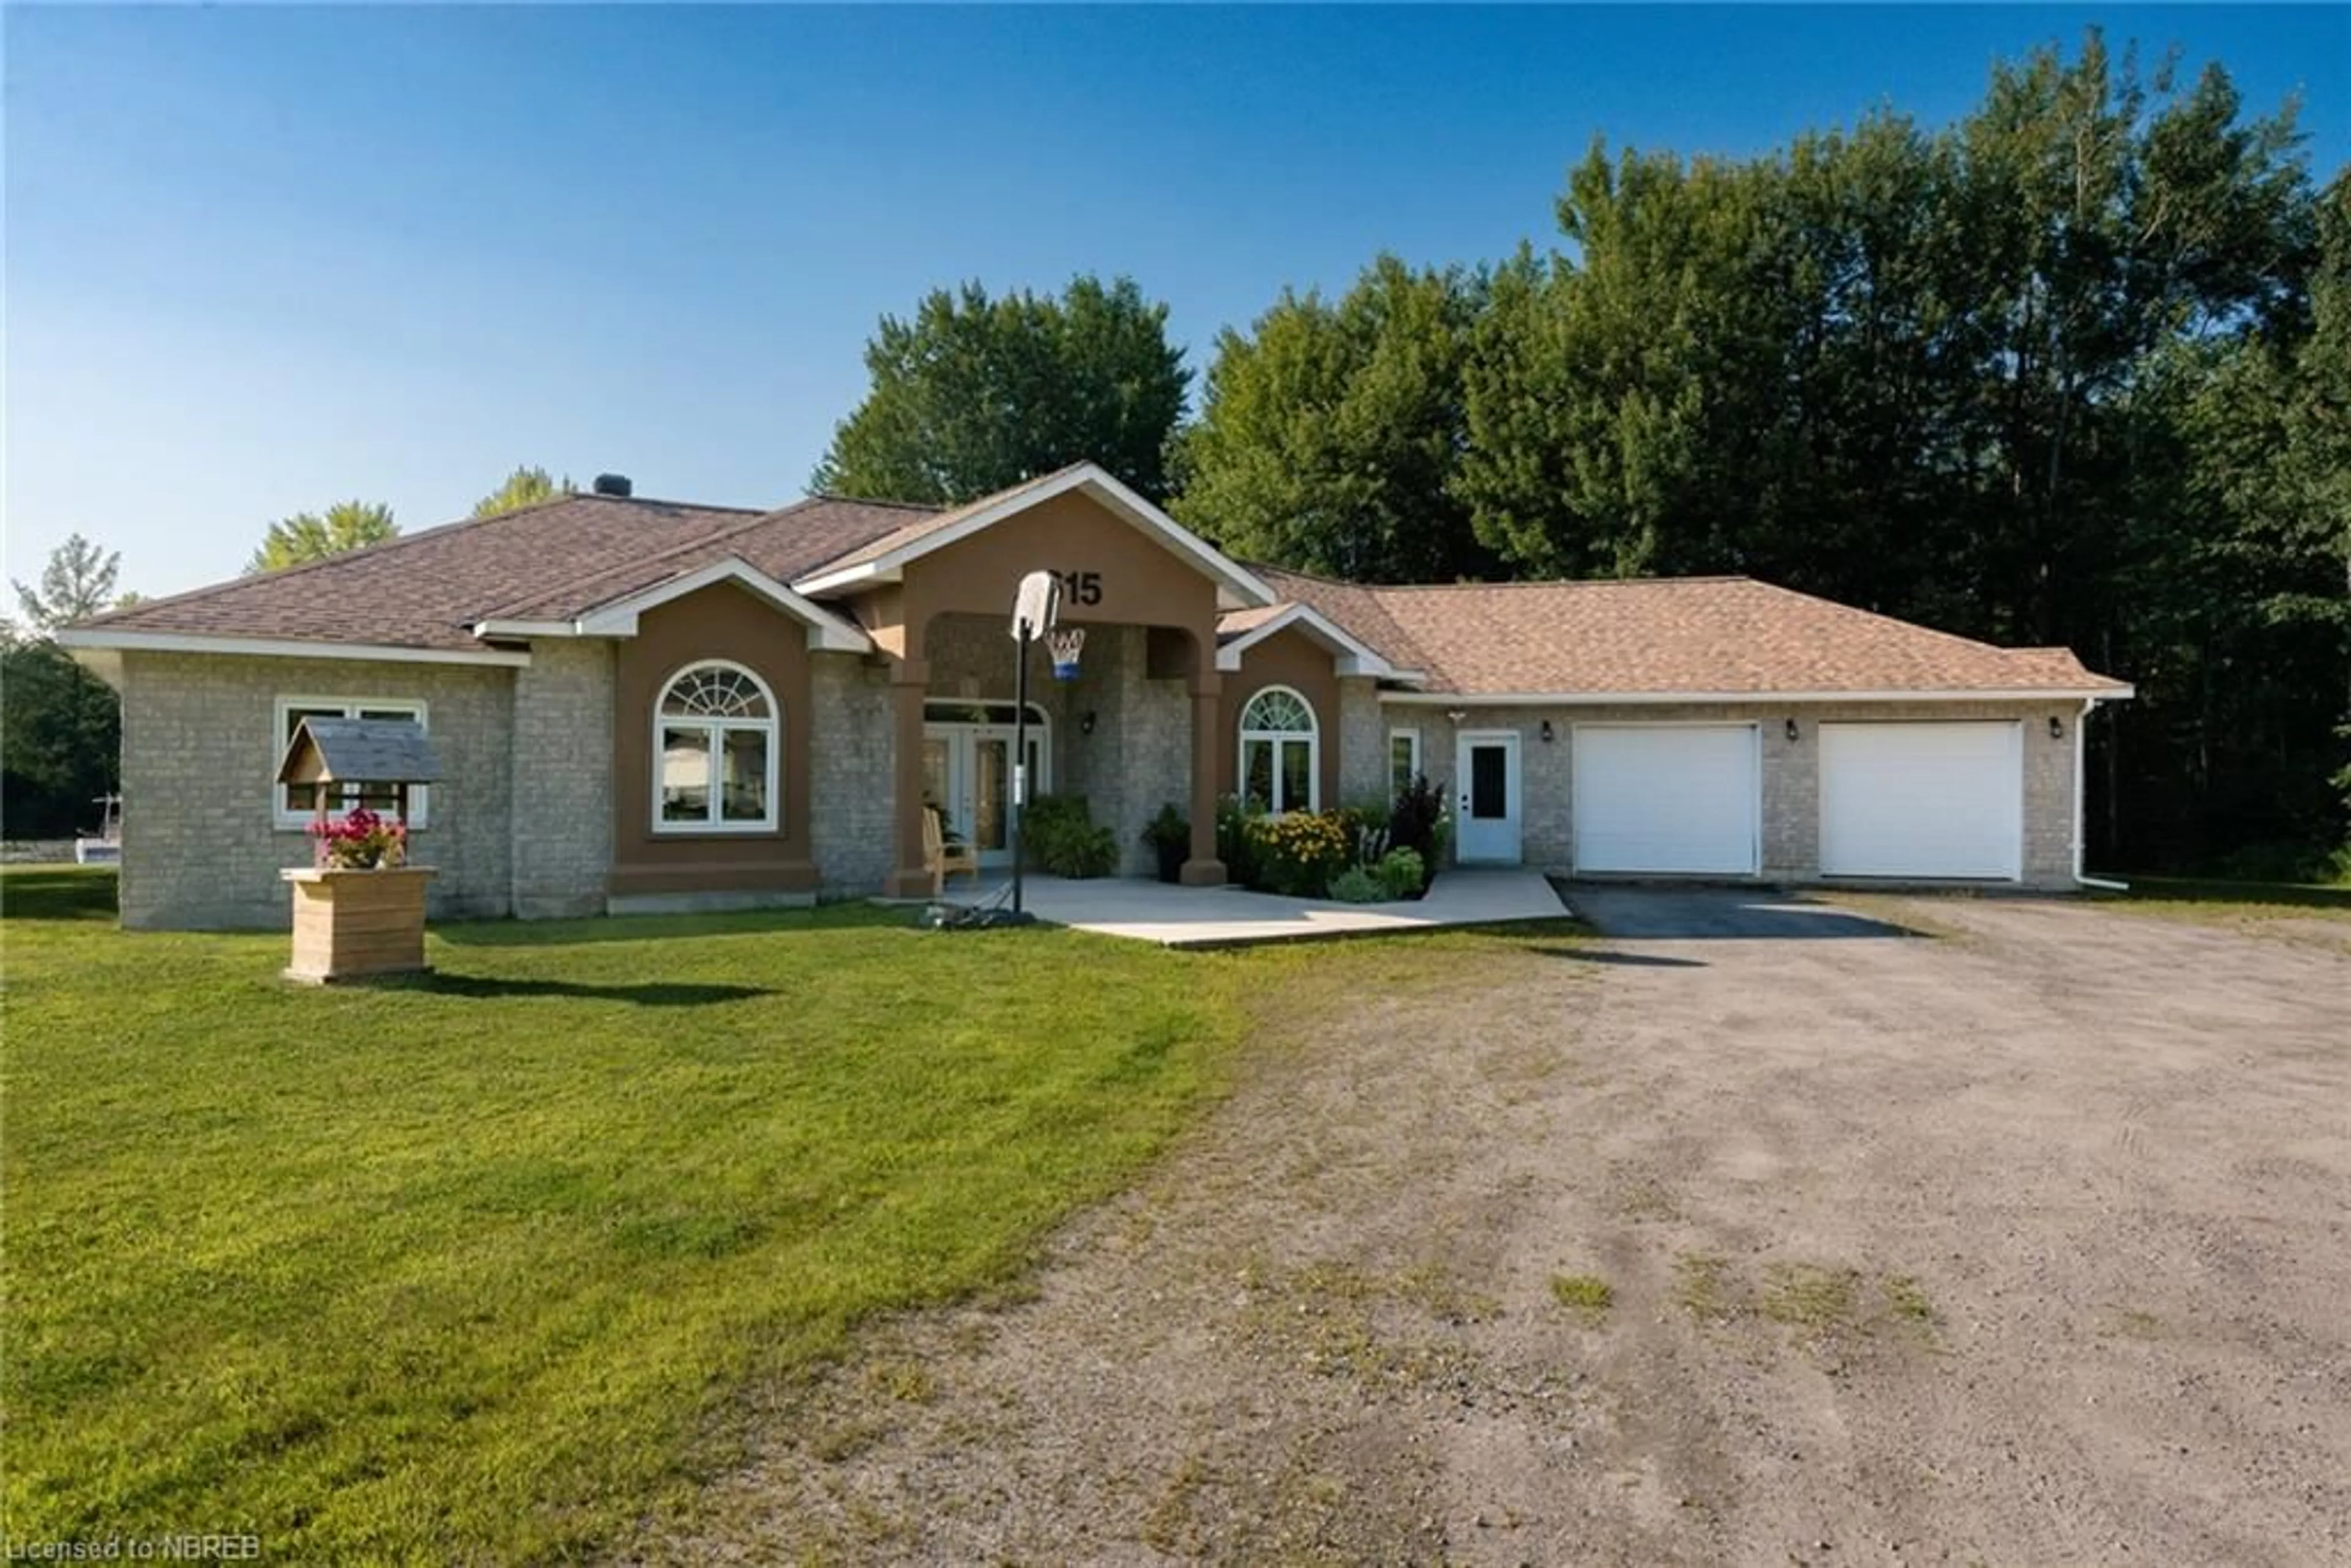 Frontside or backside of a home for 615 Riverbend Rd, North Bay Ontario P1B 8Z4